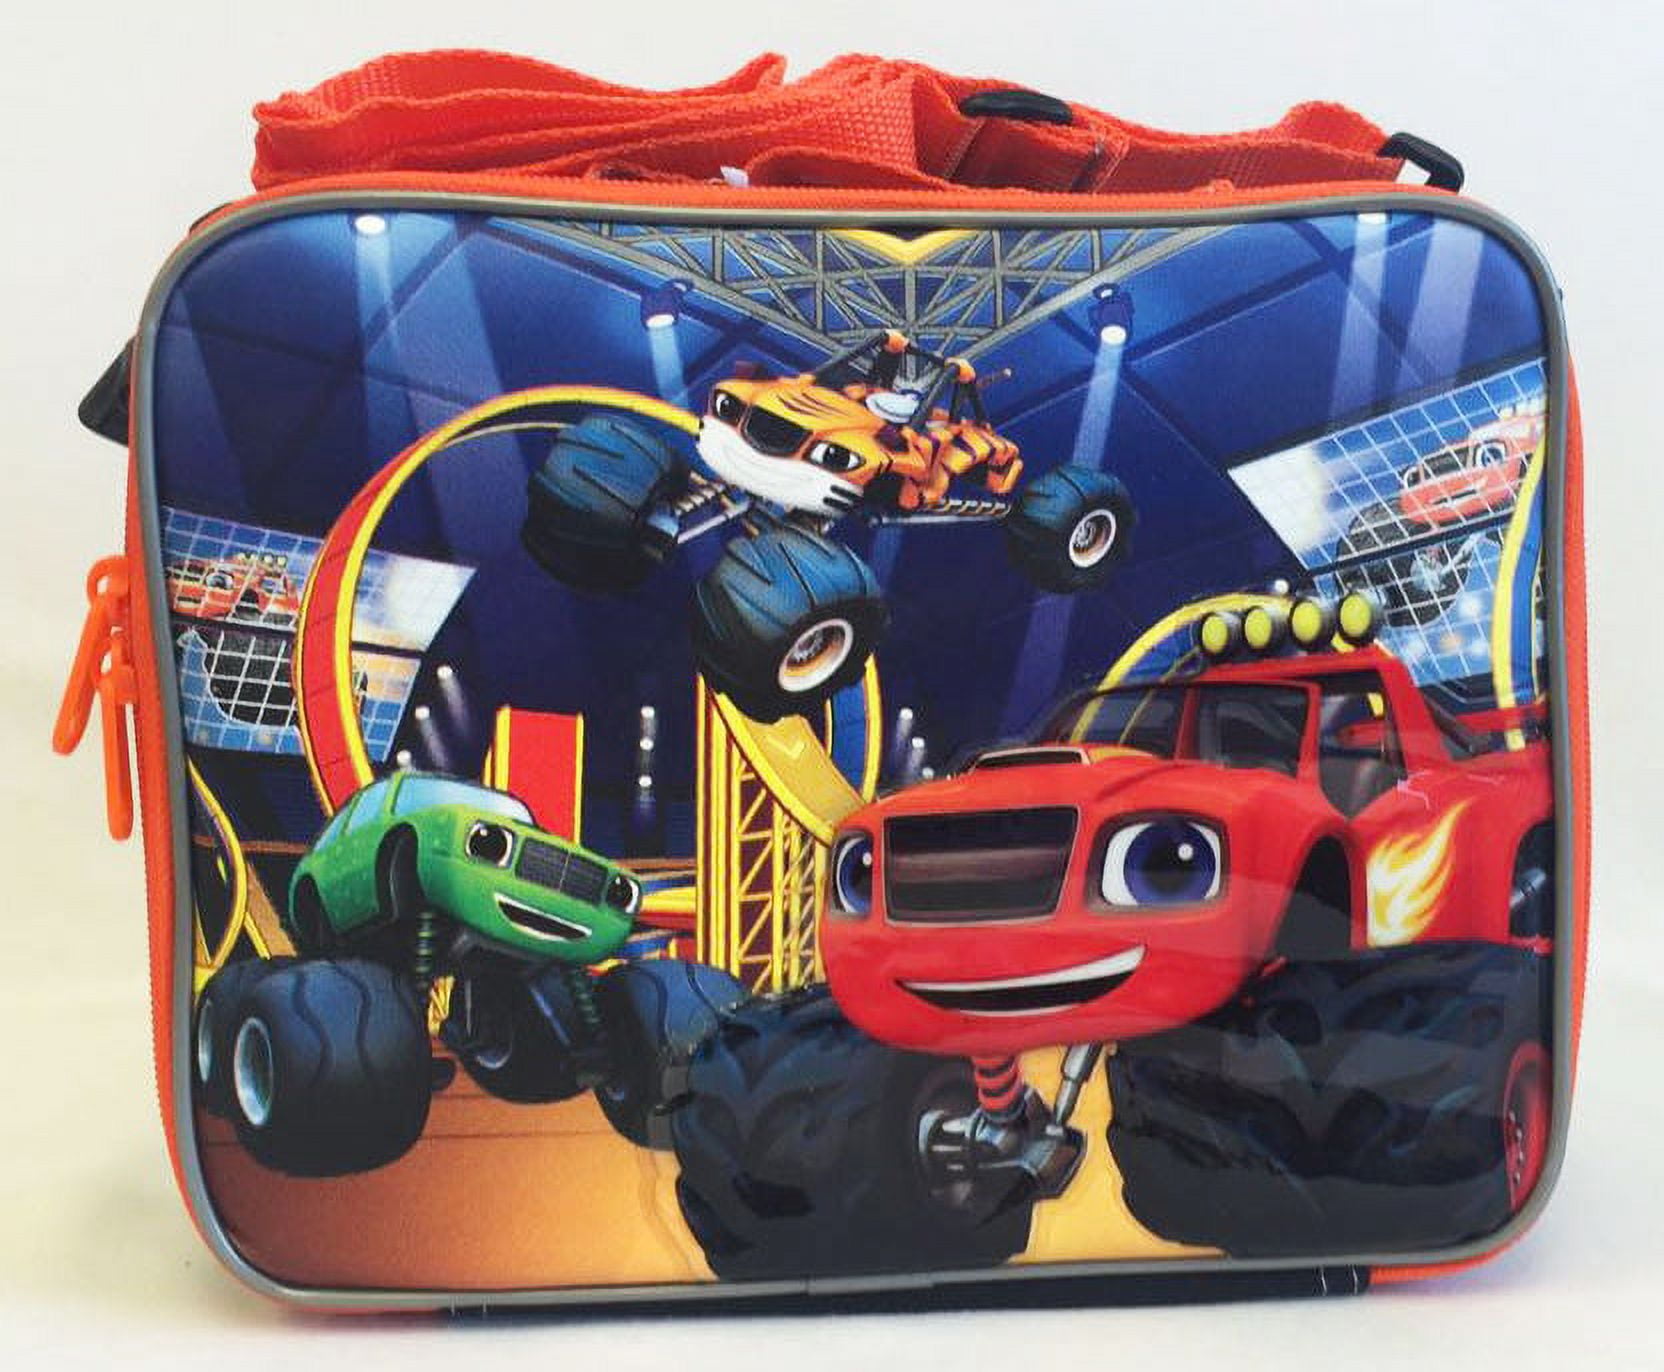 Blaze and the Monster Machines Boys Soft Insulated School Lunch Box BMCO02YT